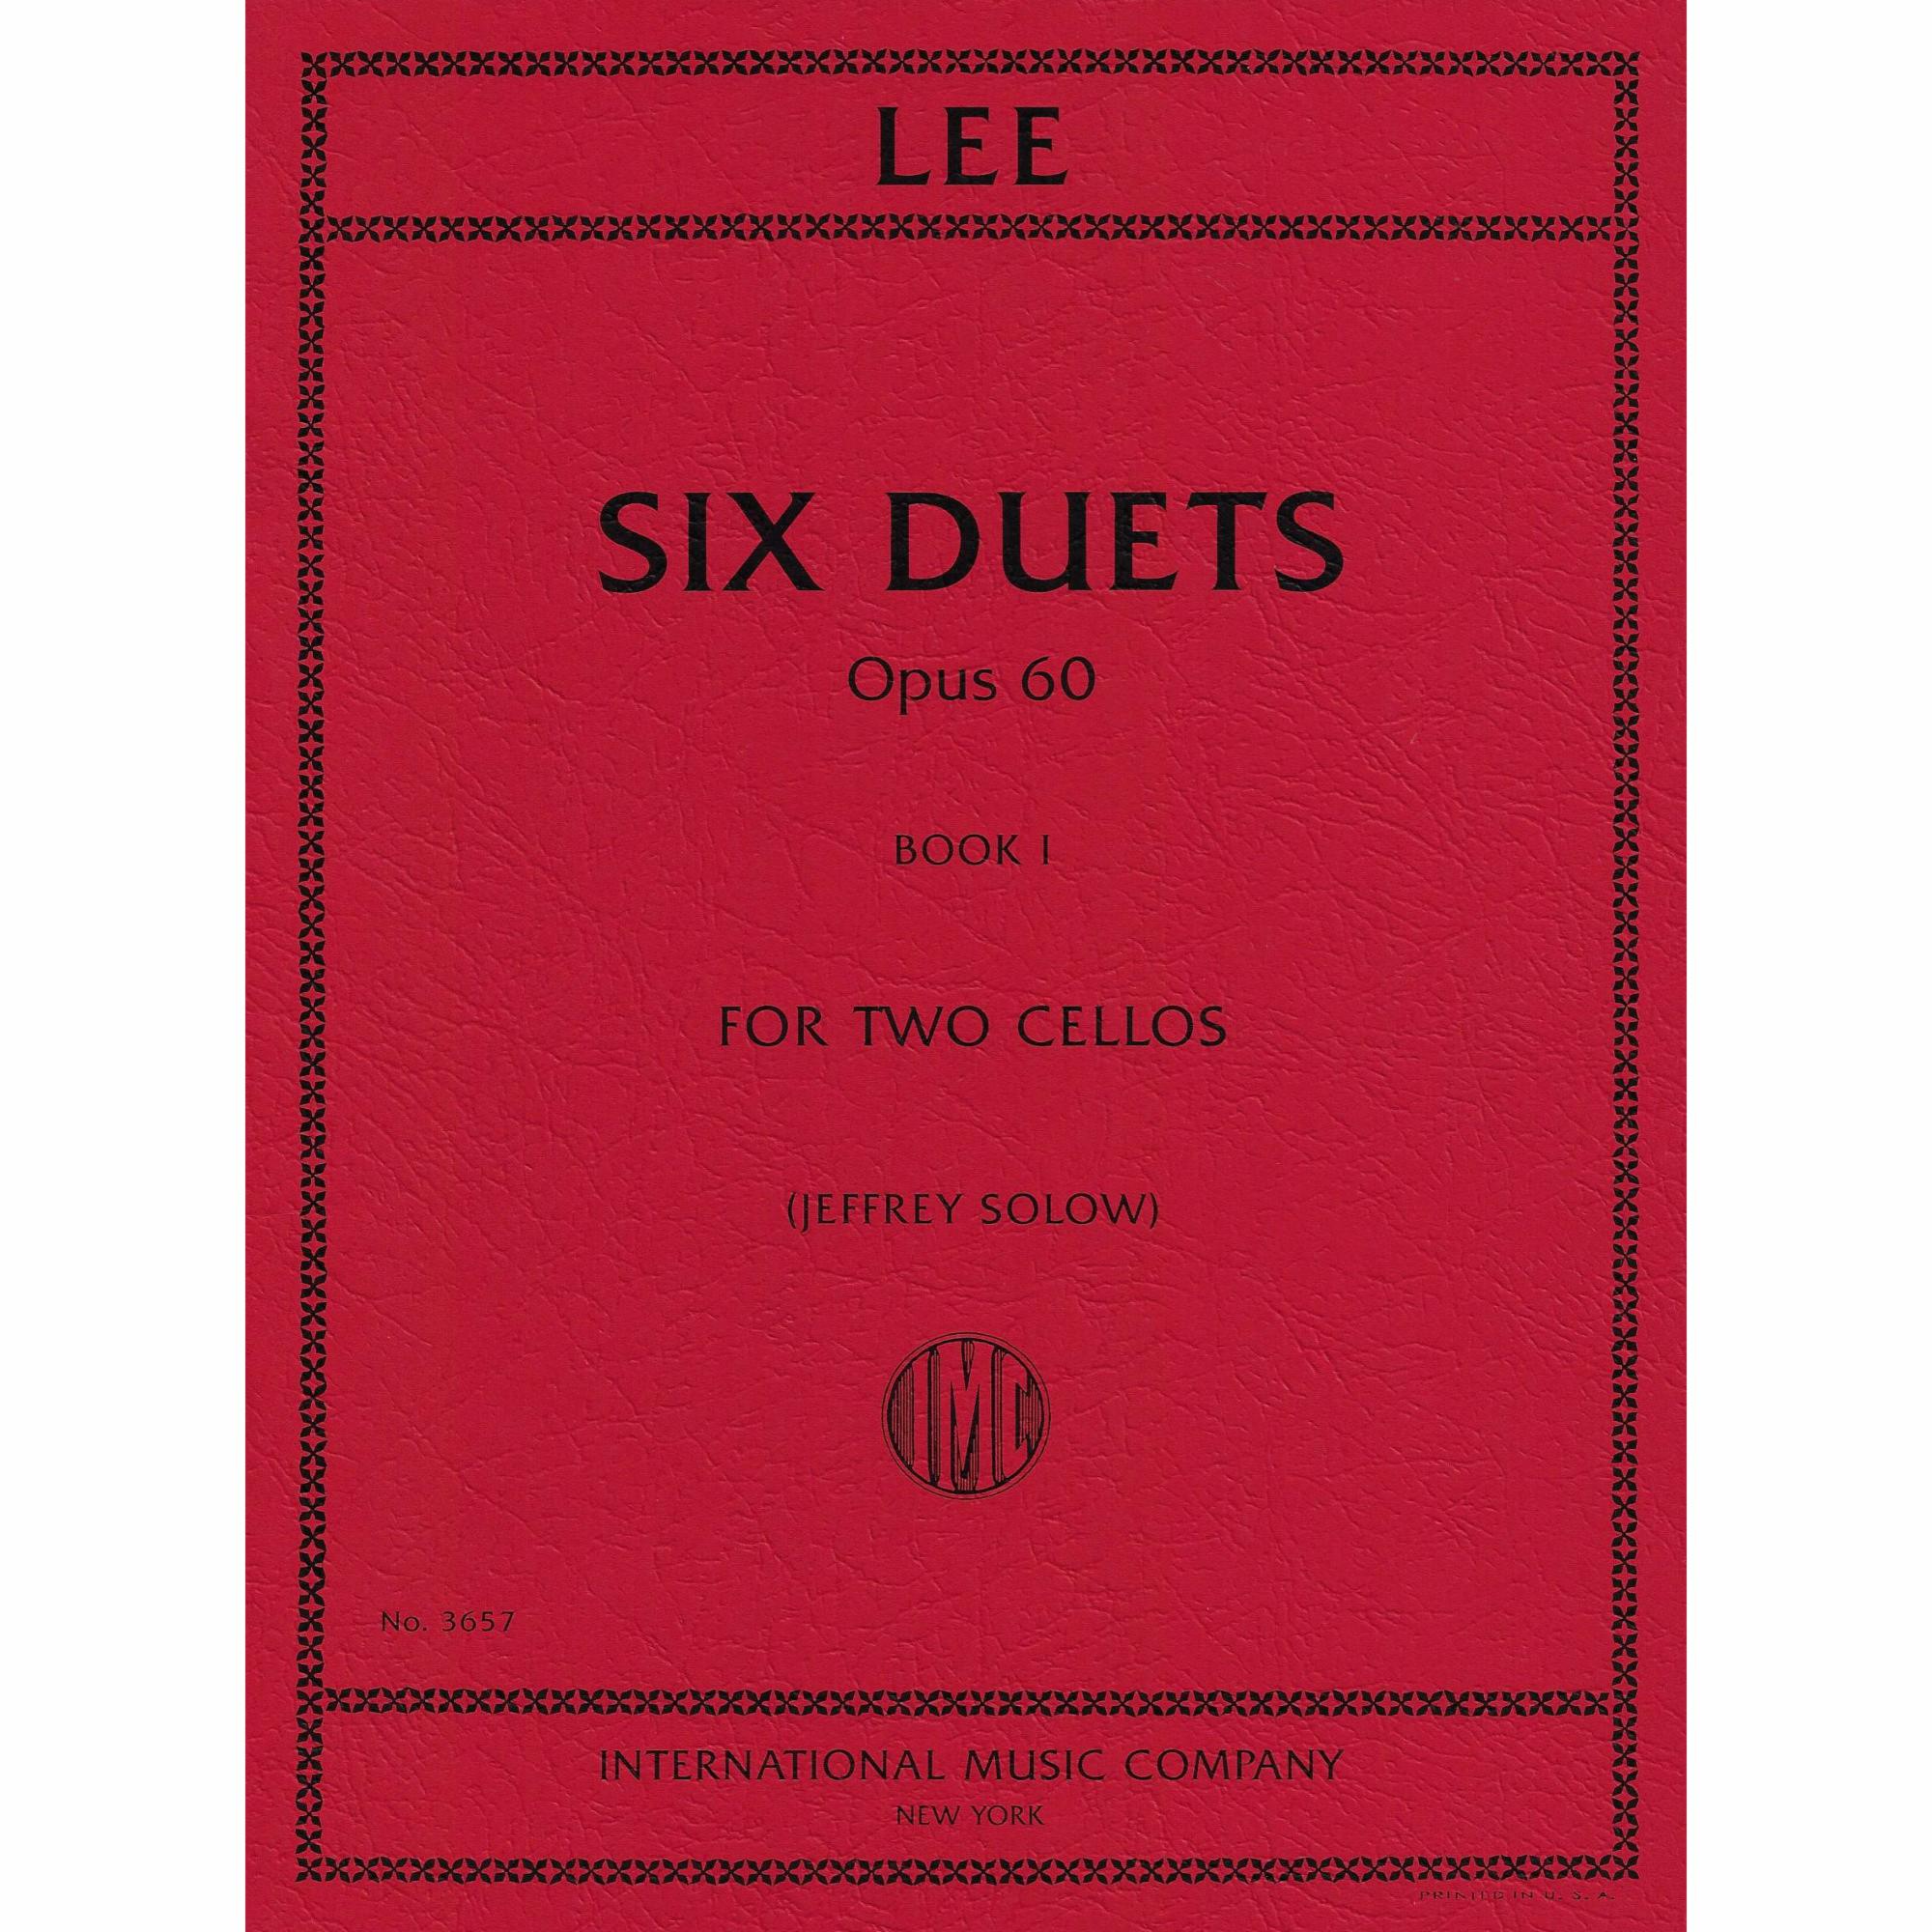 Lee -- Six Duets, Op. 60, Books I-II for Two Cellos